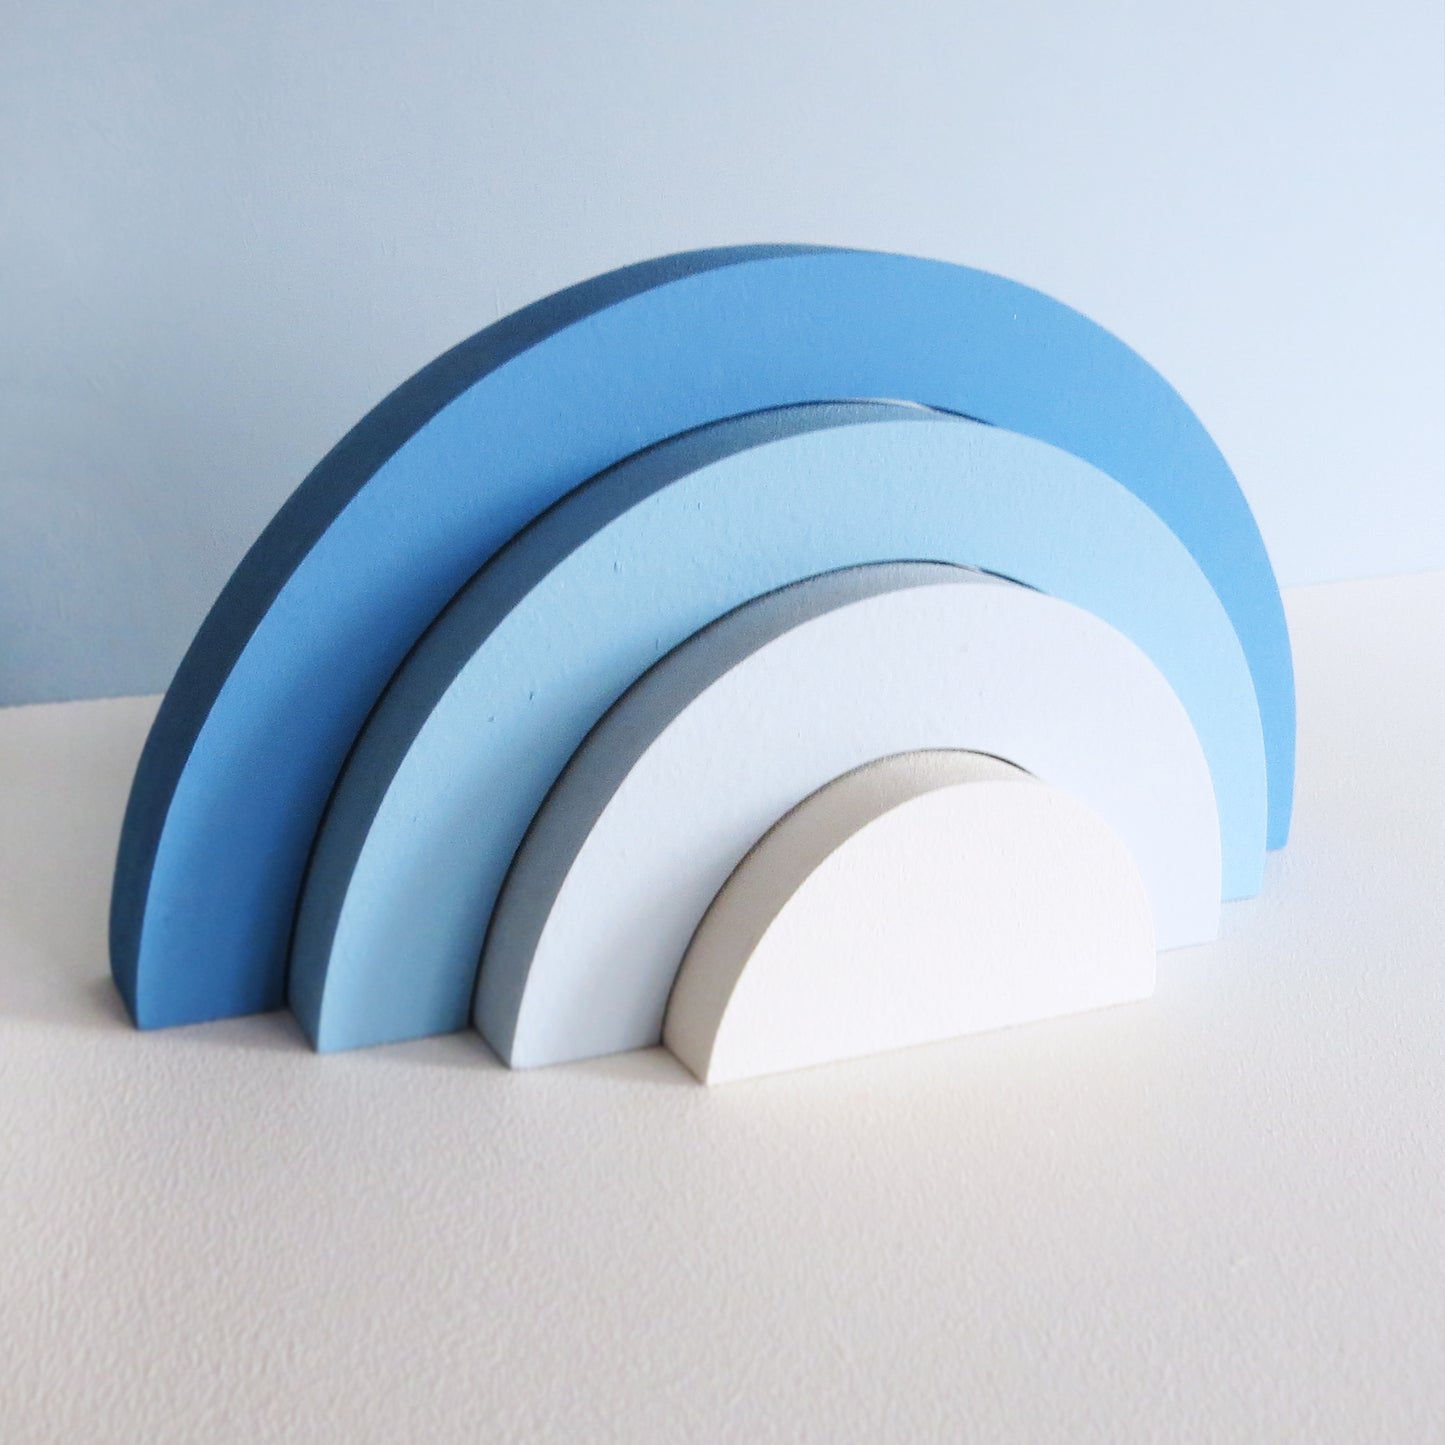 Childrens nursery 4 section rainbow shelf stacker painted in a blue ombre design.